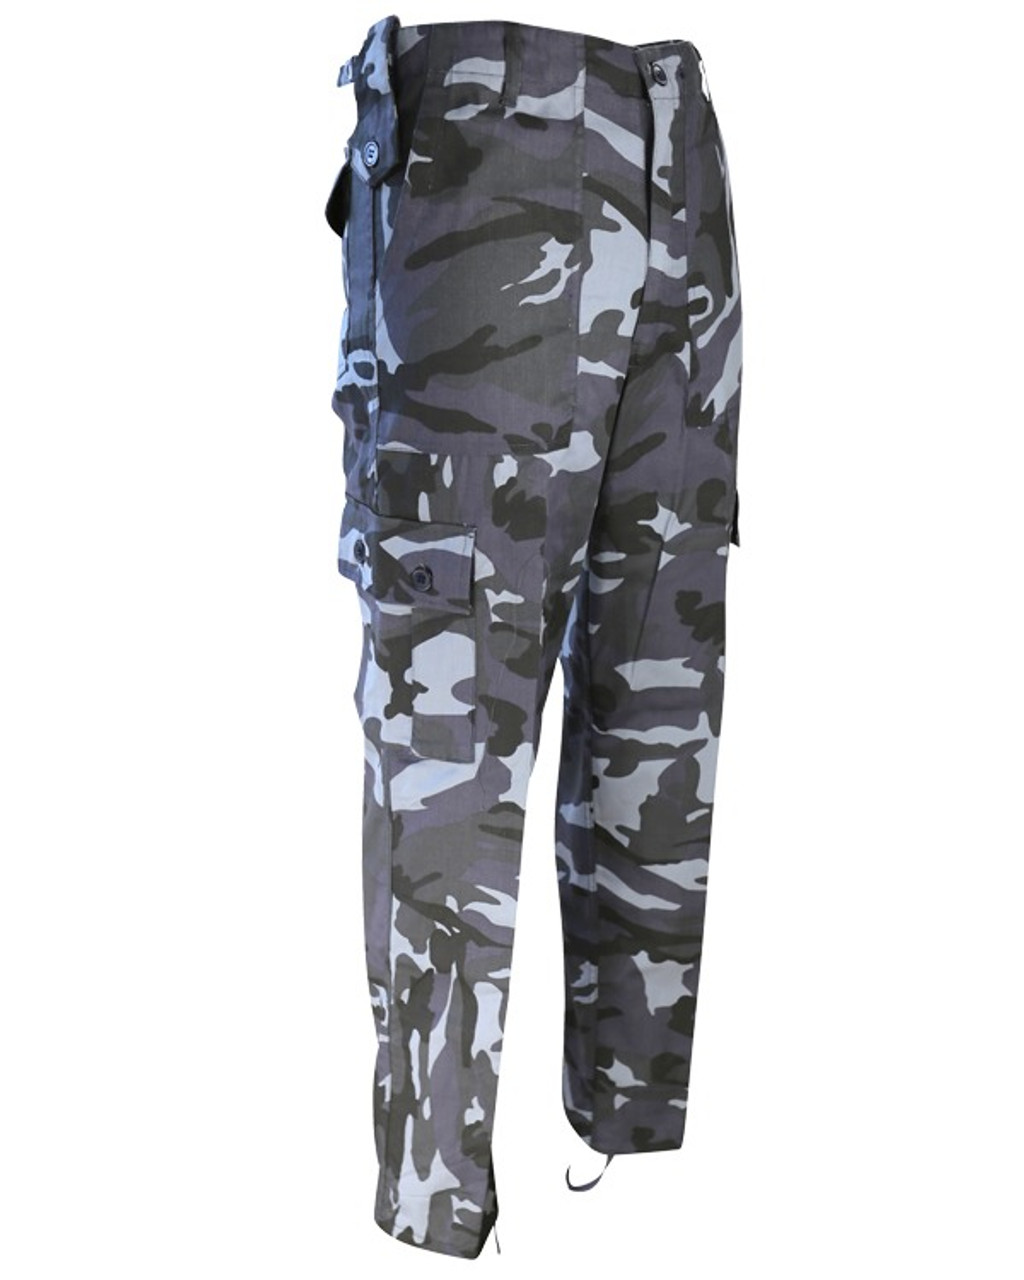 3M Reflective Camo Trousers – Harsh and Cruel